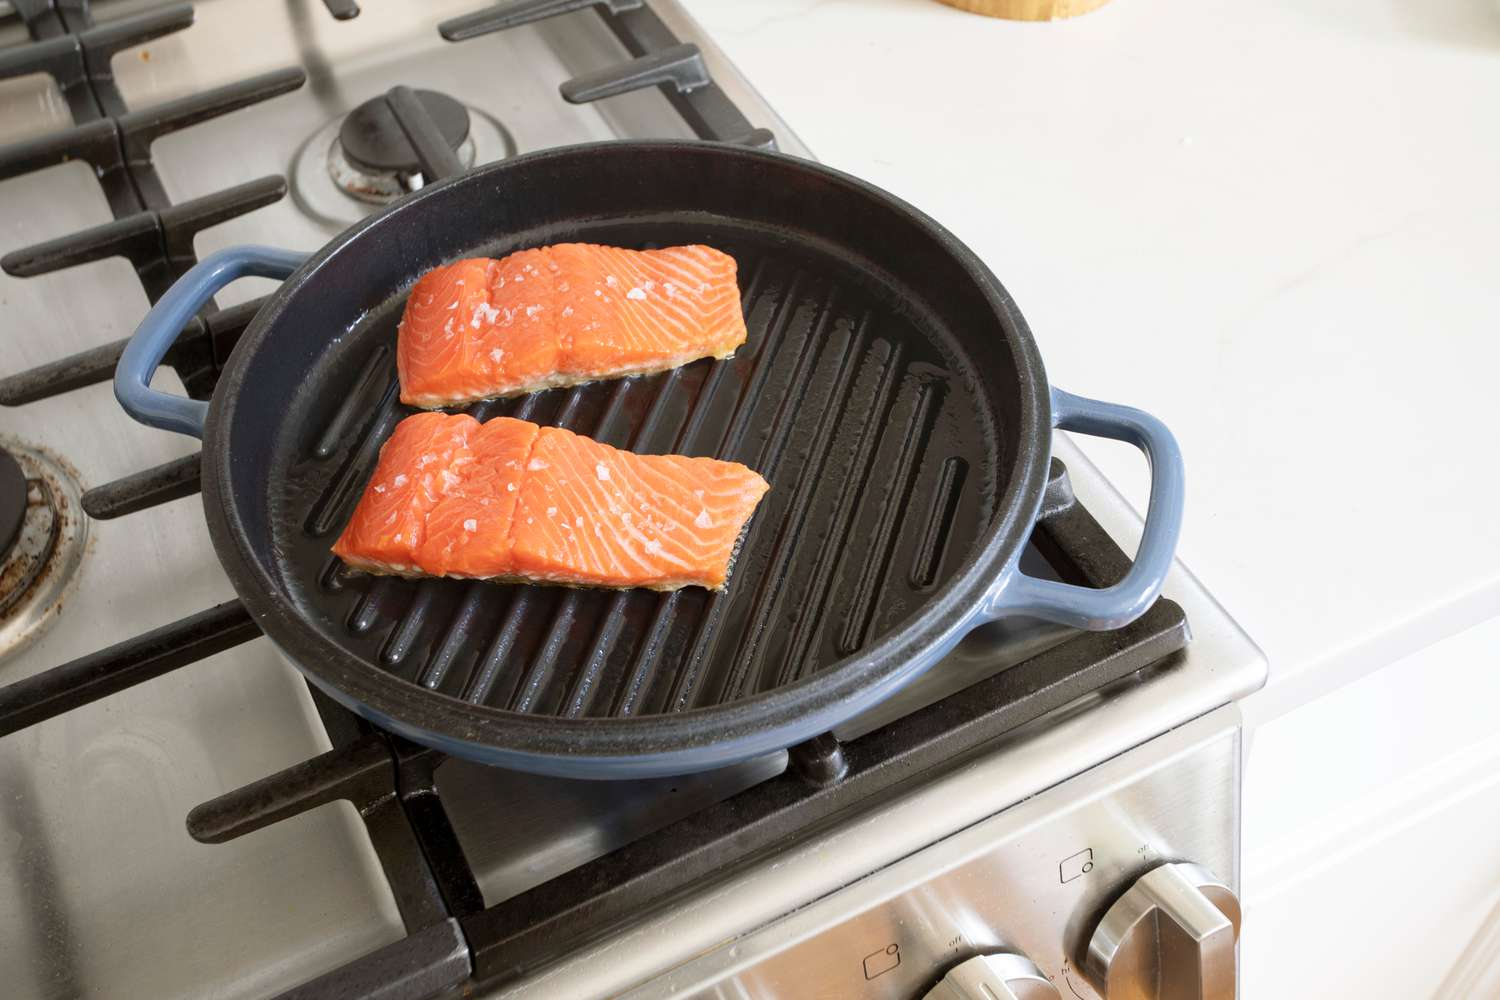 Our Place Grill Pan with Salmon cooking on it